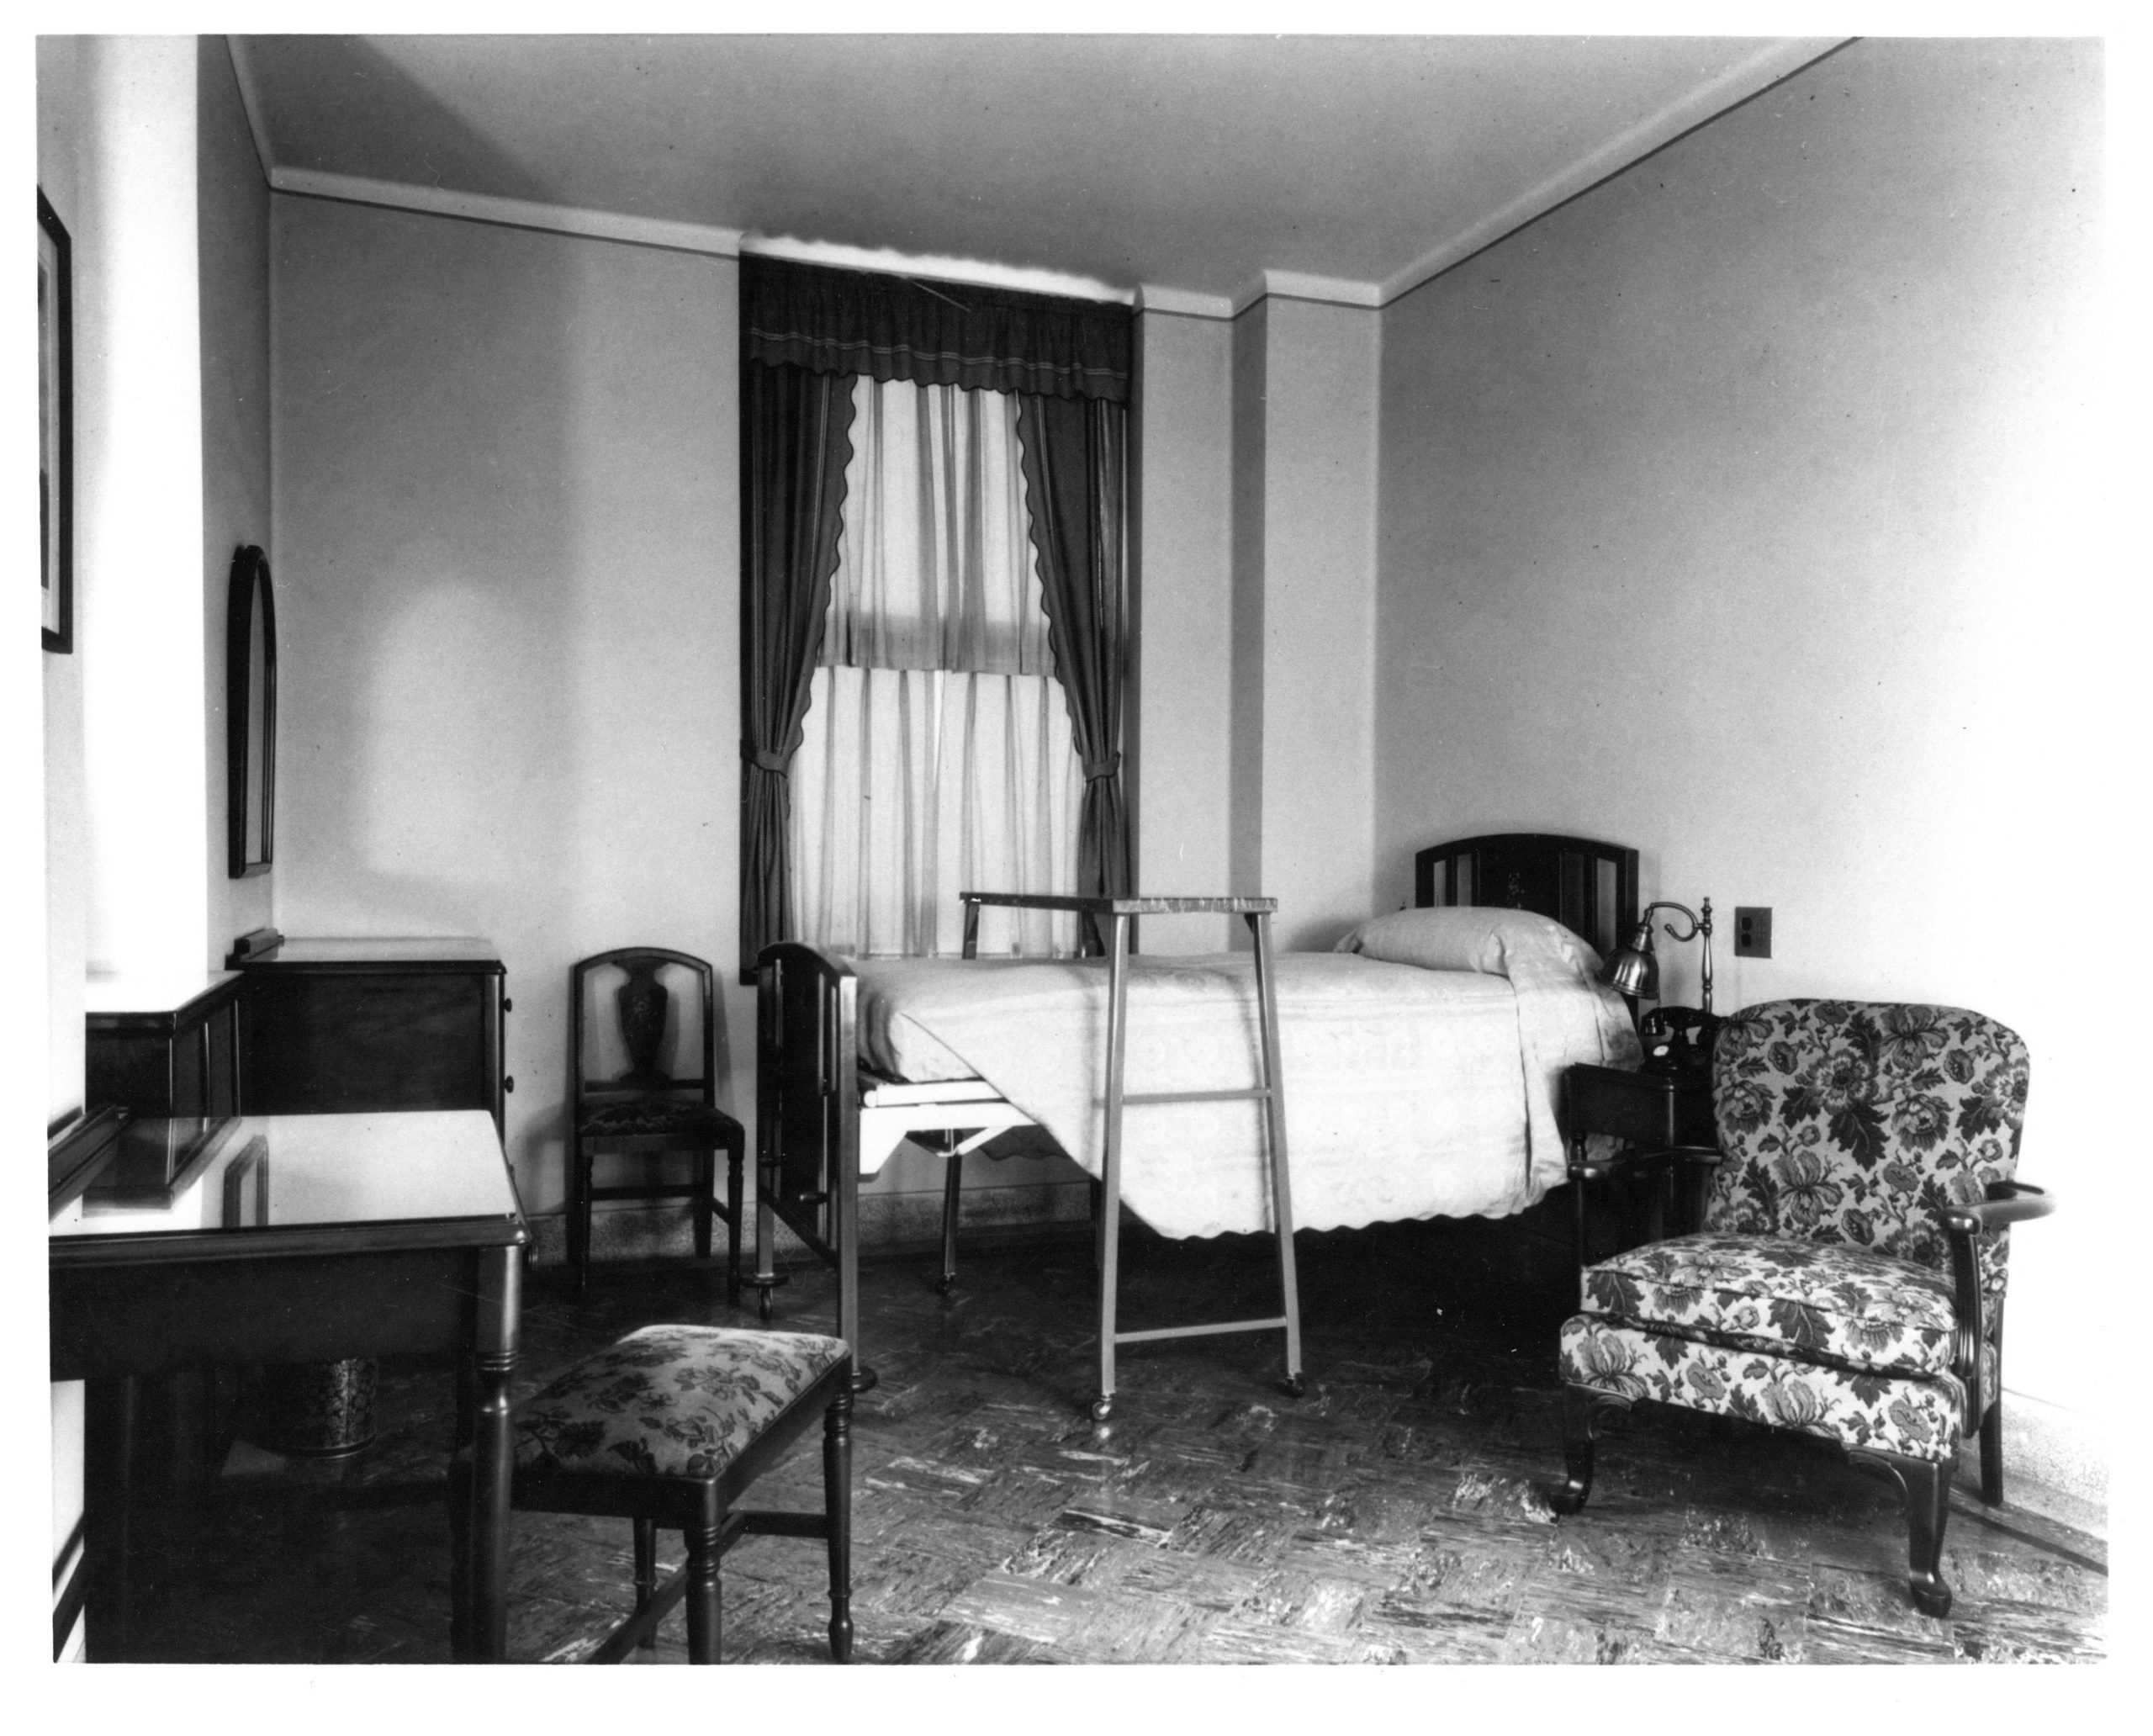 Black-and-white photograph of patient room. Furniture includes twin bed with tray, armchair, dresser, desk with chair. There's also a window with a curtain.